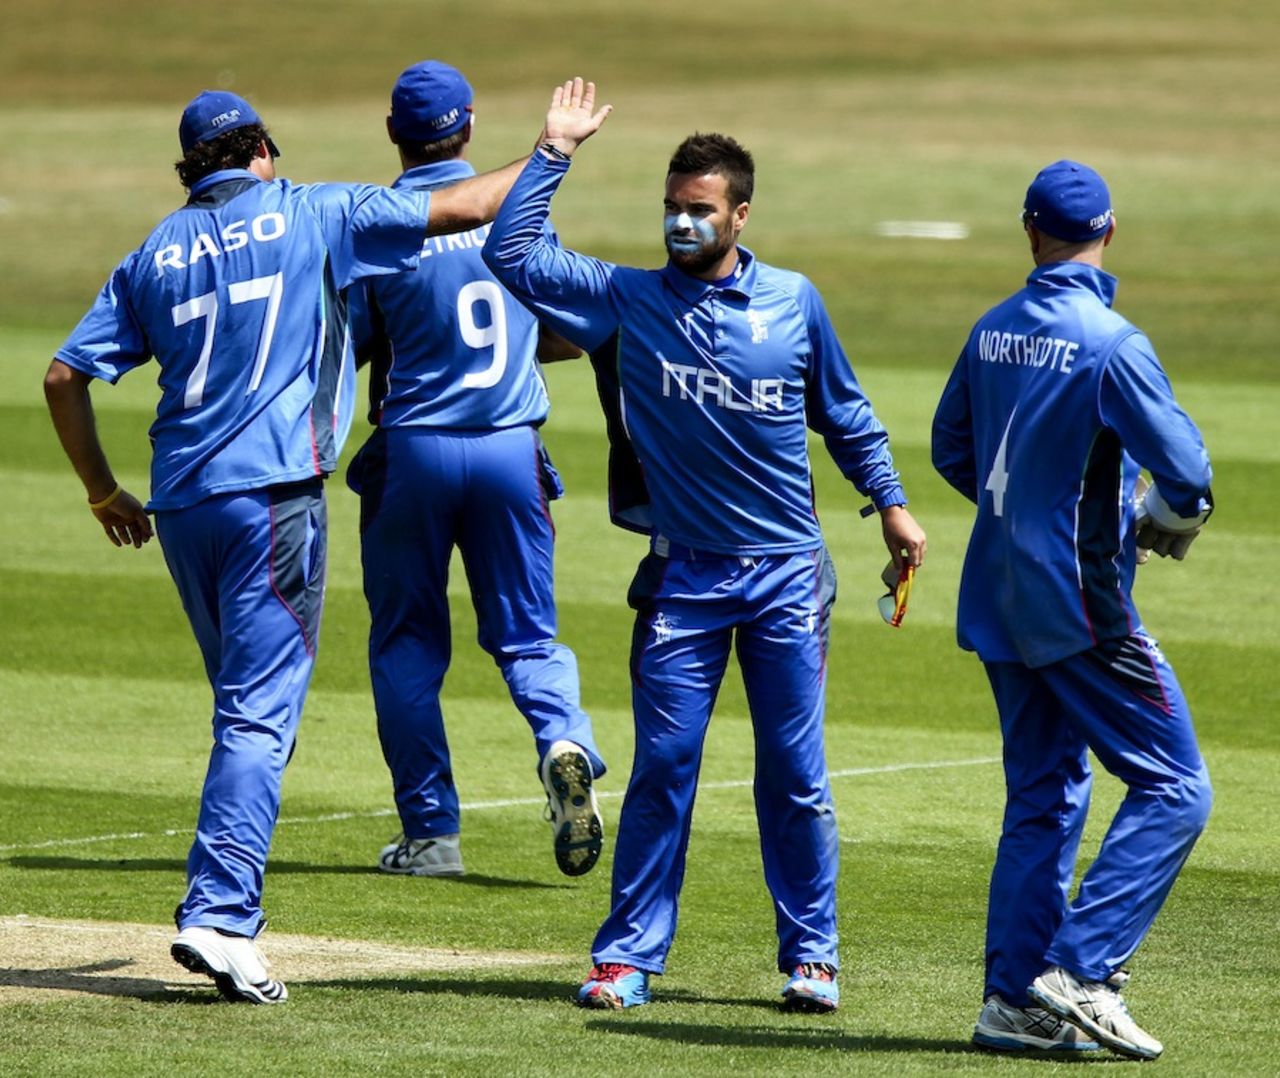 Carl Sandri celebrates a wicket with team-mates, Italy v Jersey, 1st semi-final, ICC European Championship Division One, Hove, July 13, 2013